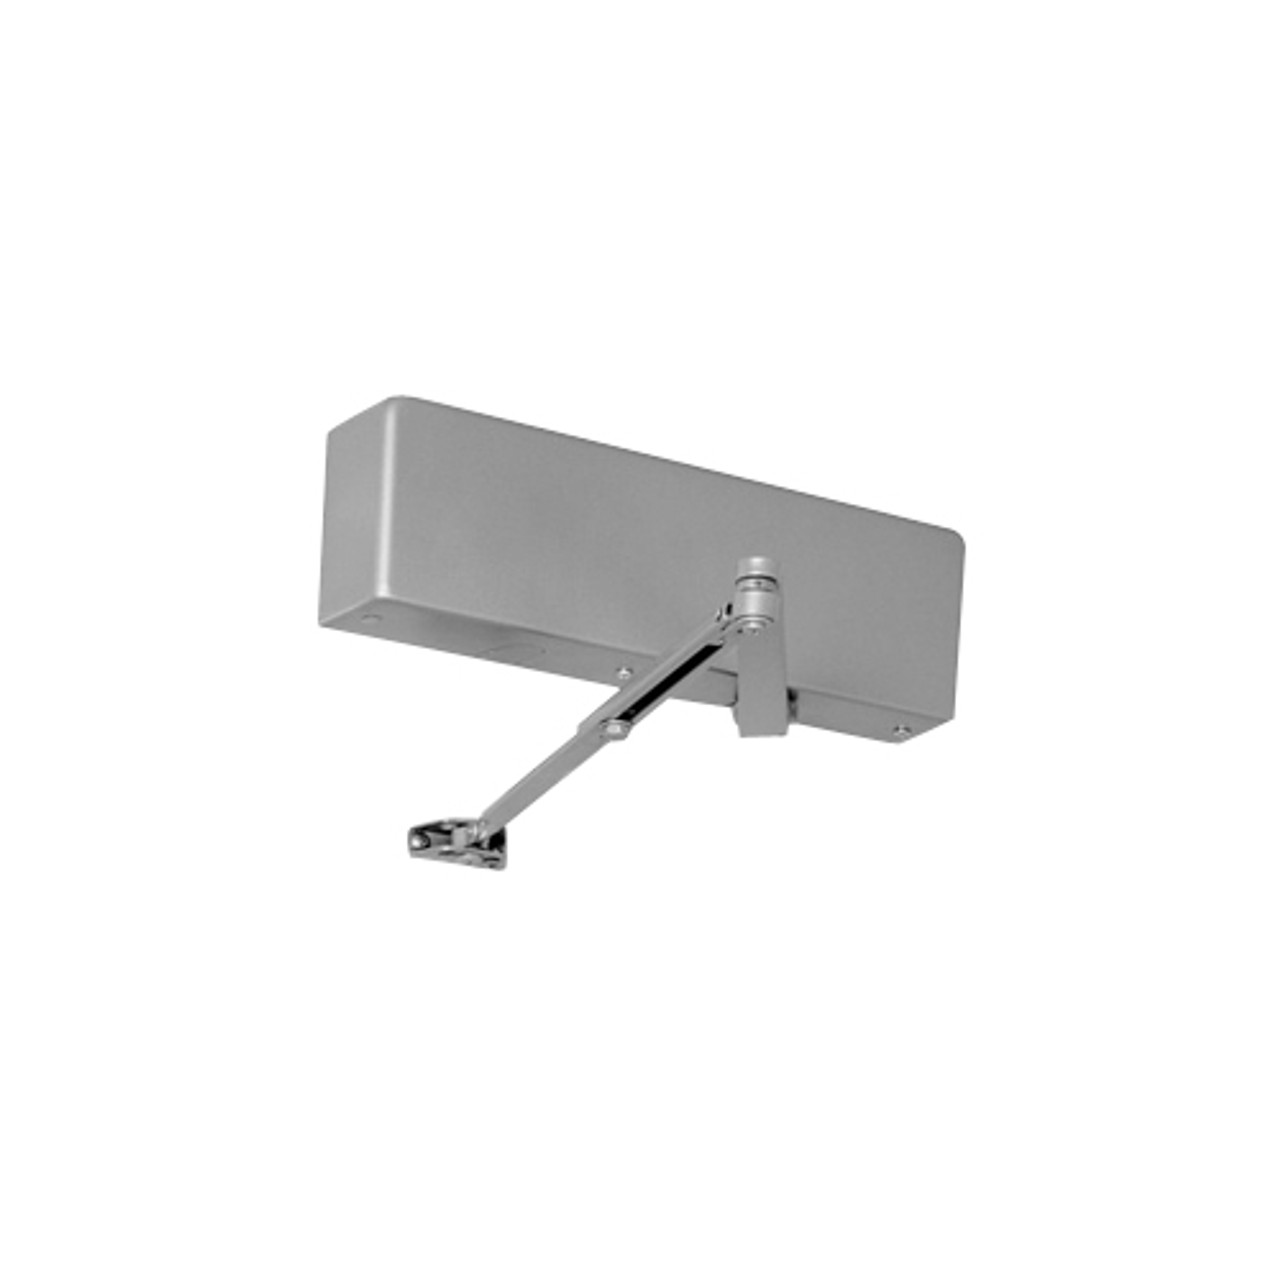 J7500HDA-689 Norton 7500 Series Hold Open Institutional Door Closer with Top Jamb Only Reveals 2-3/4 to 6-3/4 inch to 150 Degree in Aluminum Finish